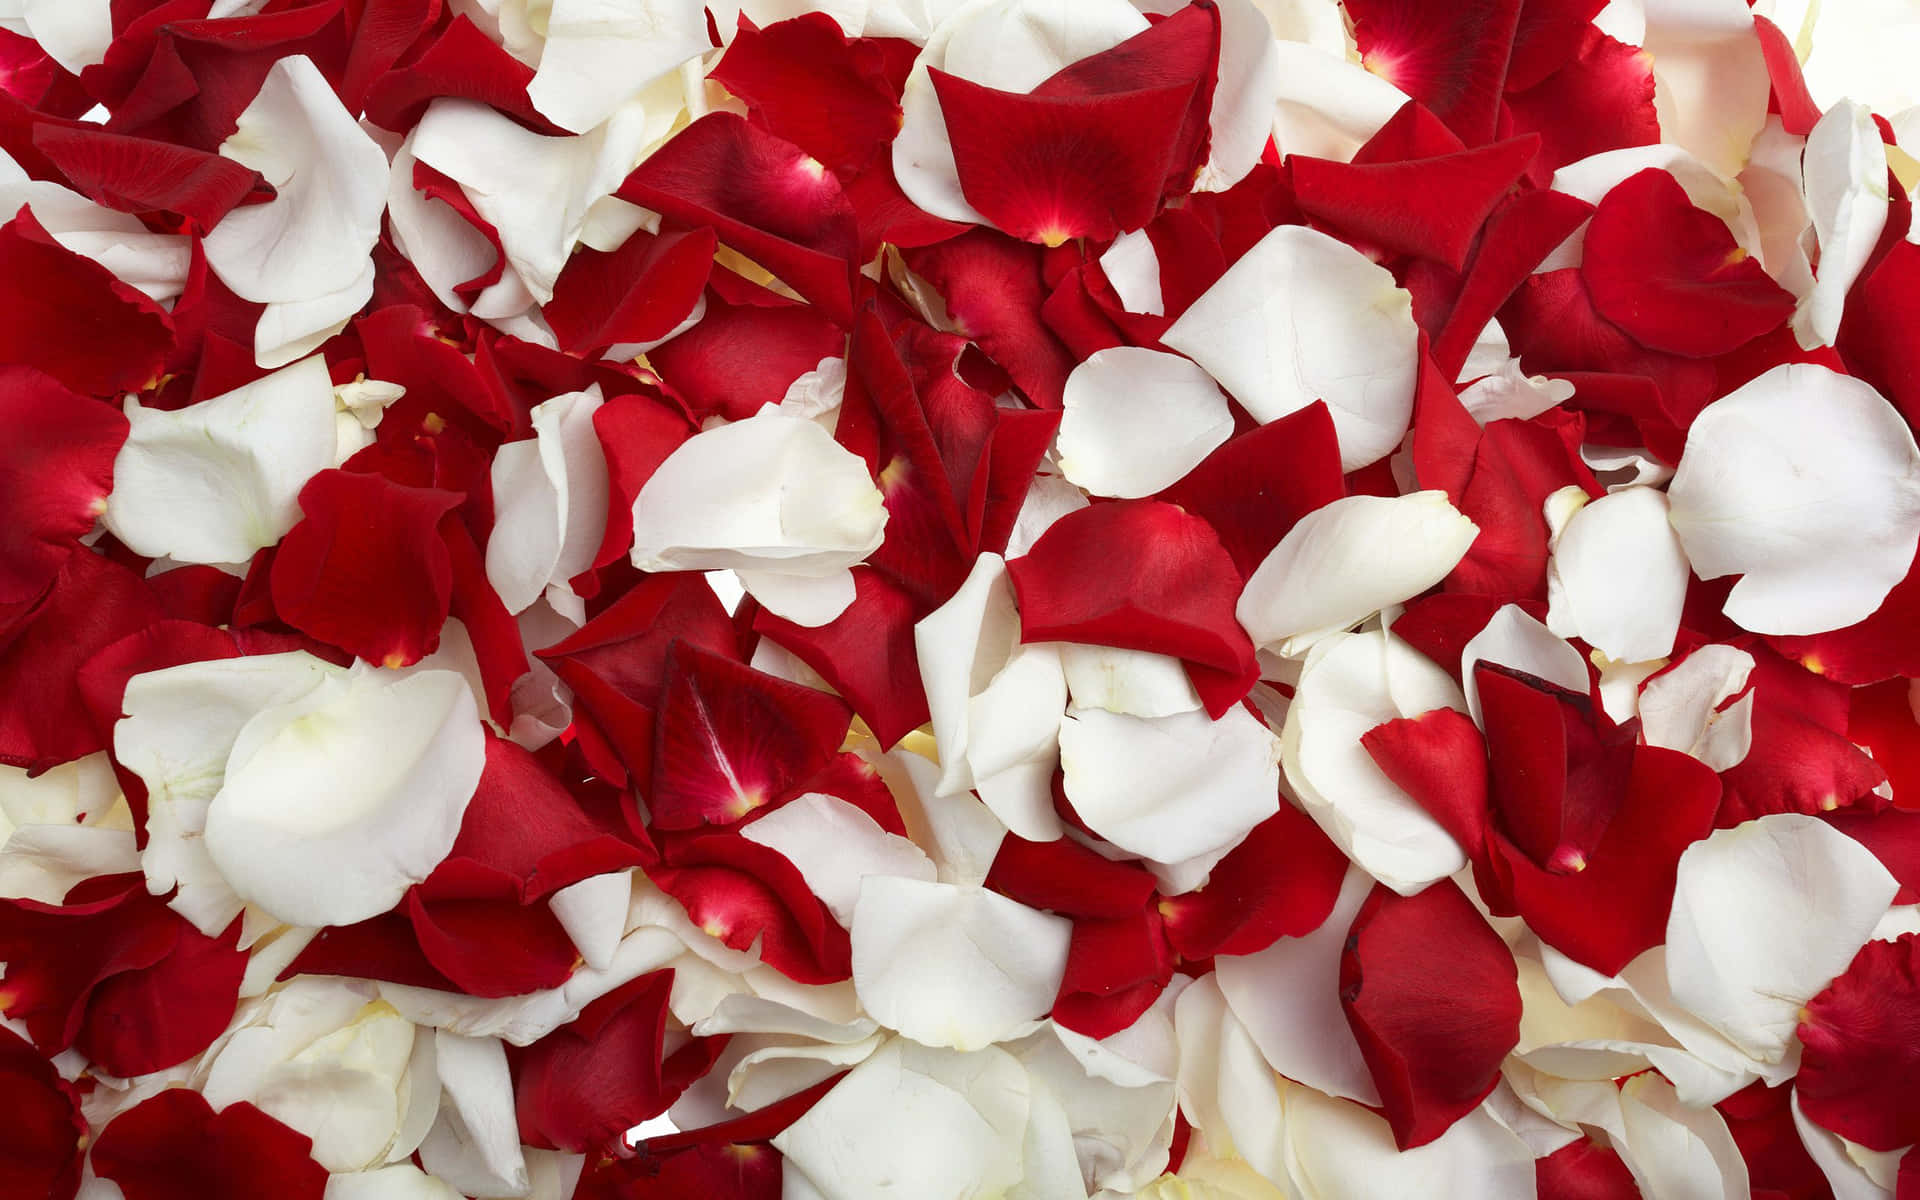 Petals Of Red And White Roses Wallpaper